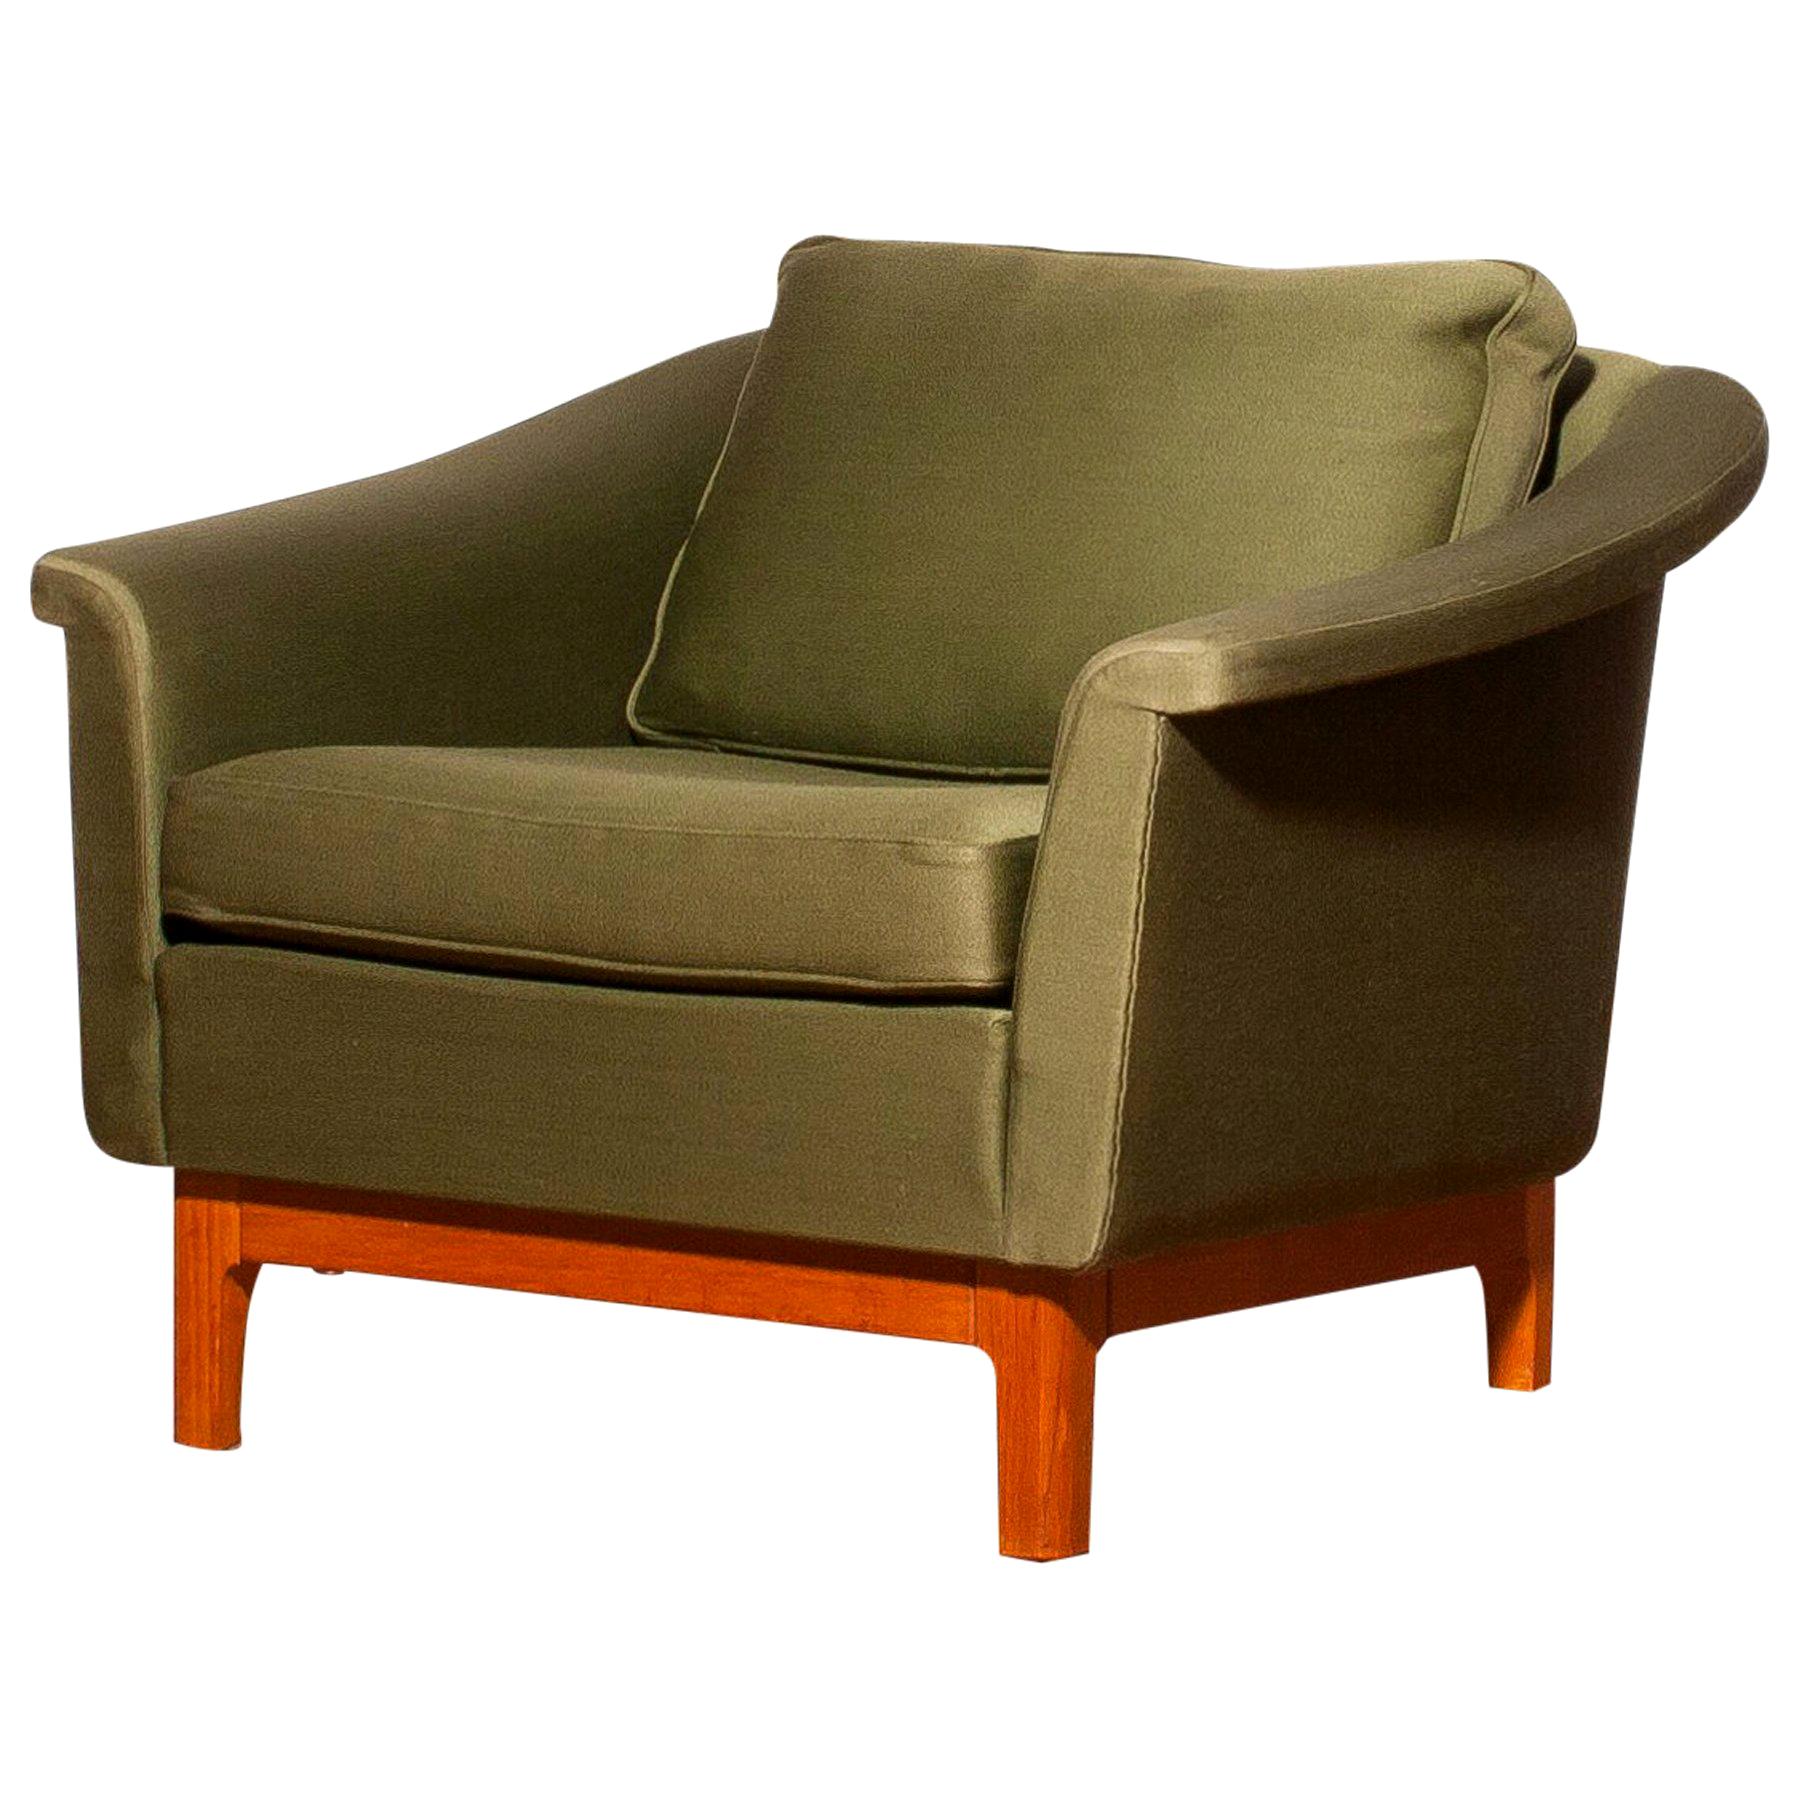 1960s, Green "Pasadena" Lounge Chair by Folke Ohlsson for DUX